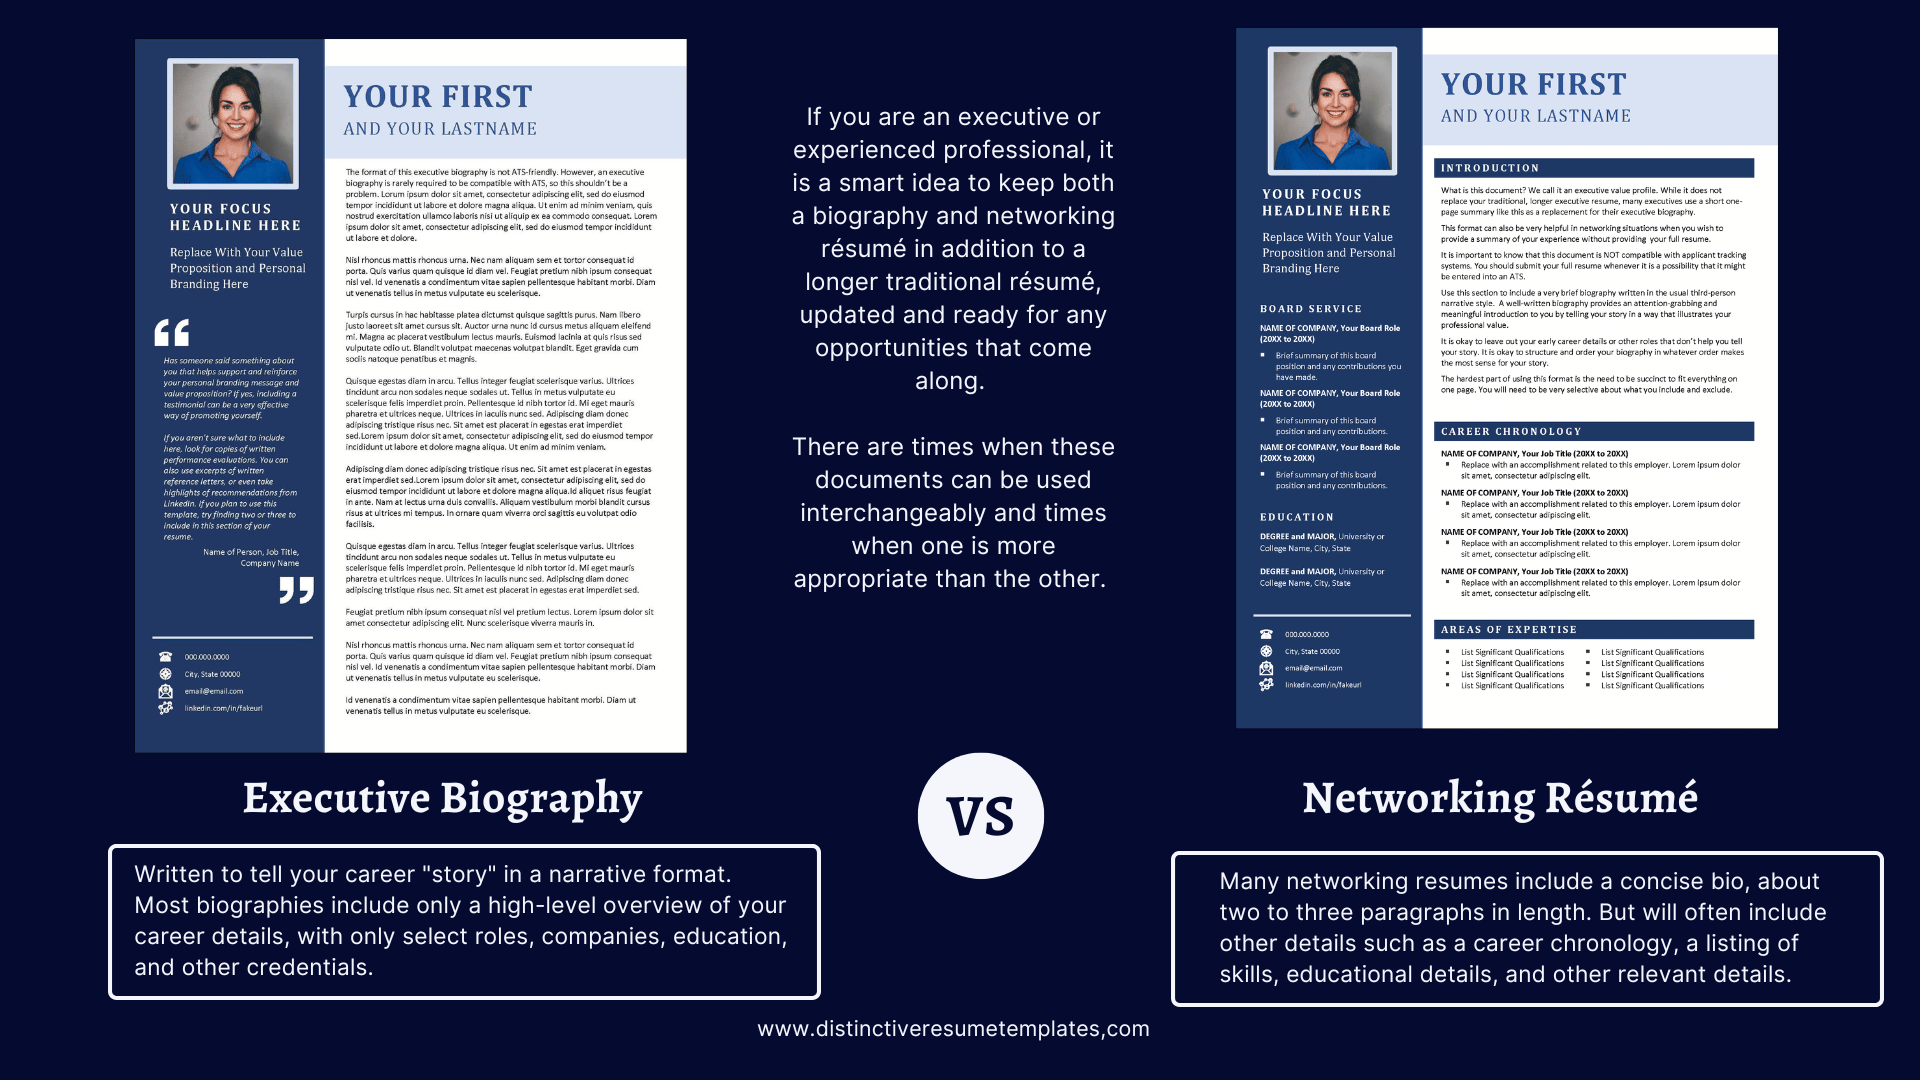 Example Networking Resume vs Executive Biography